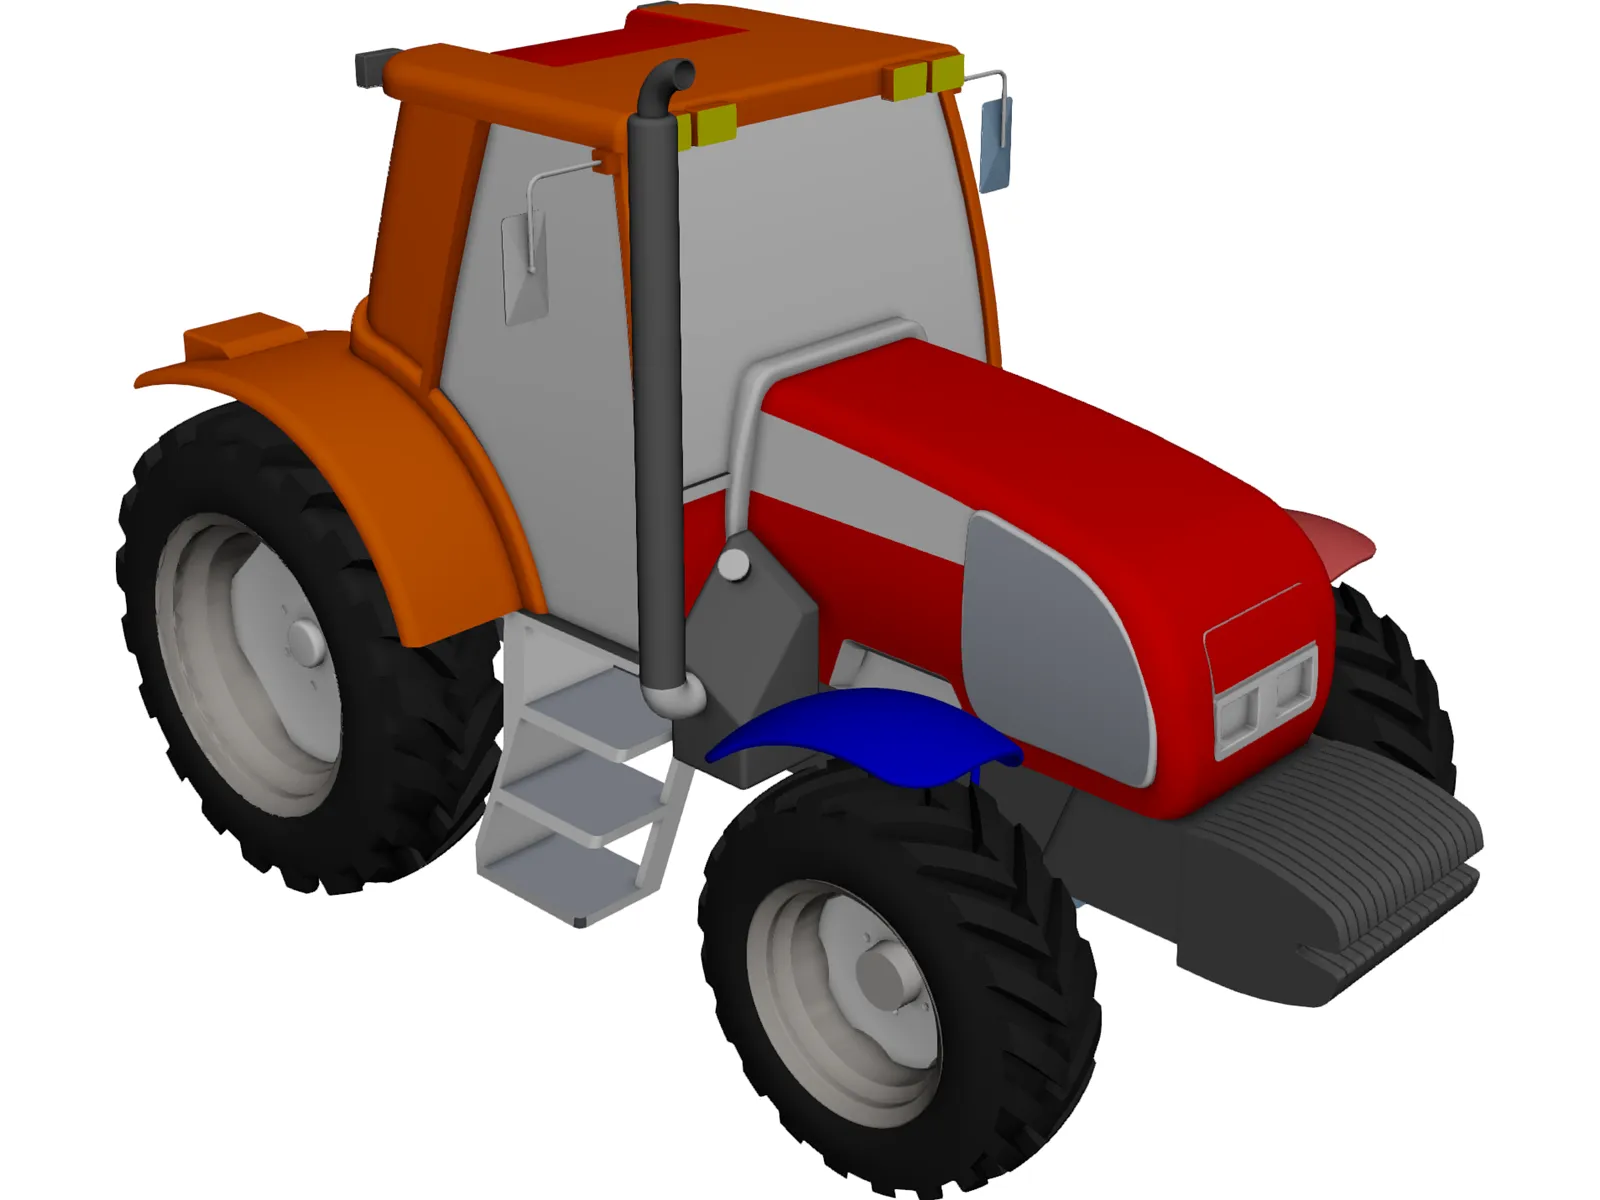 New Holland Tractor 3D Model